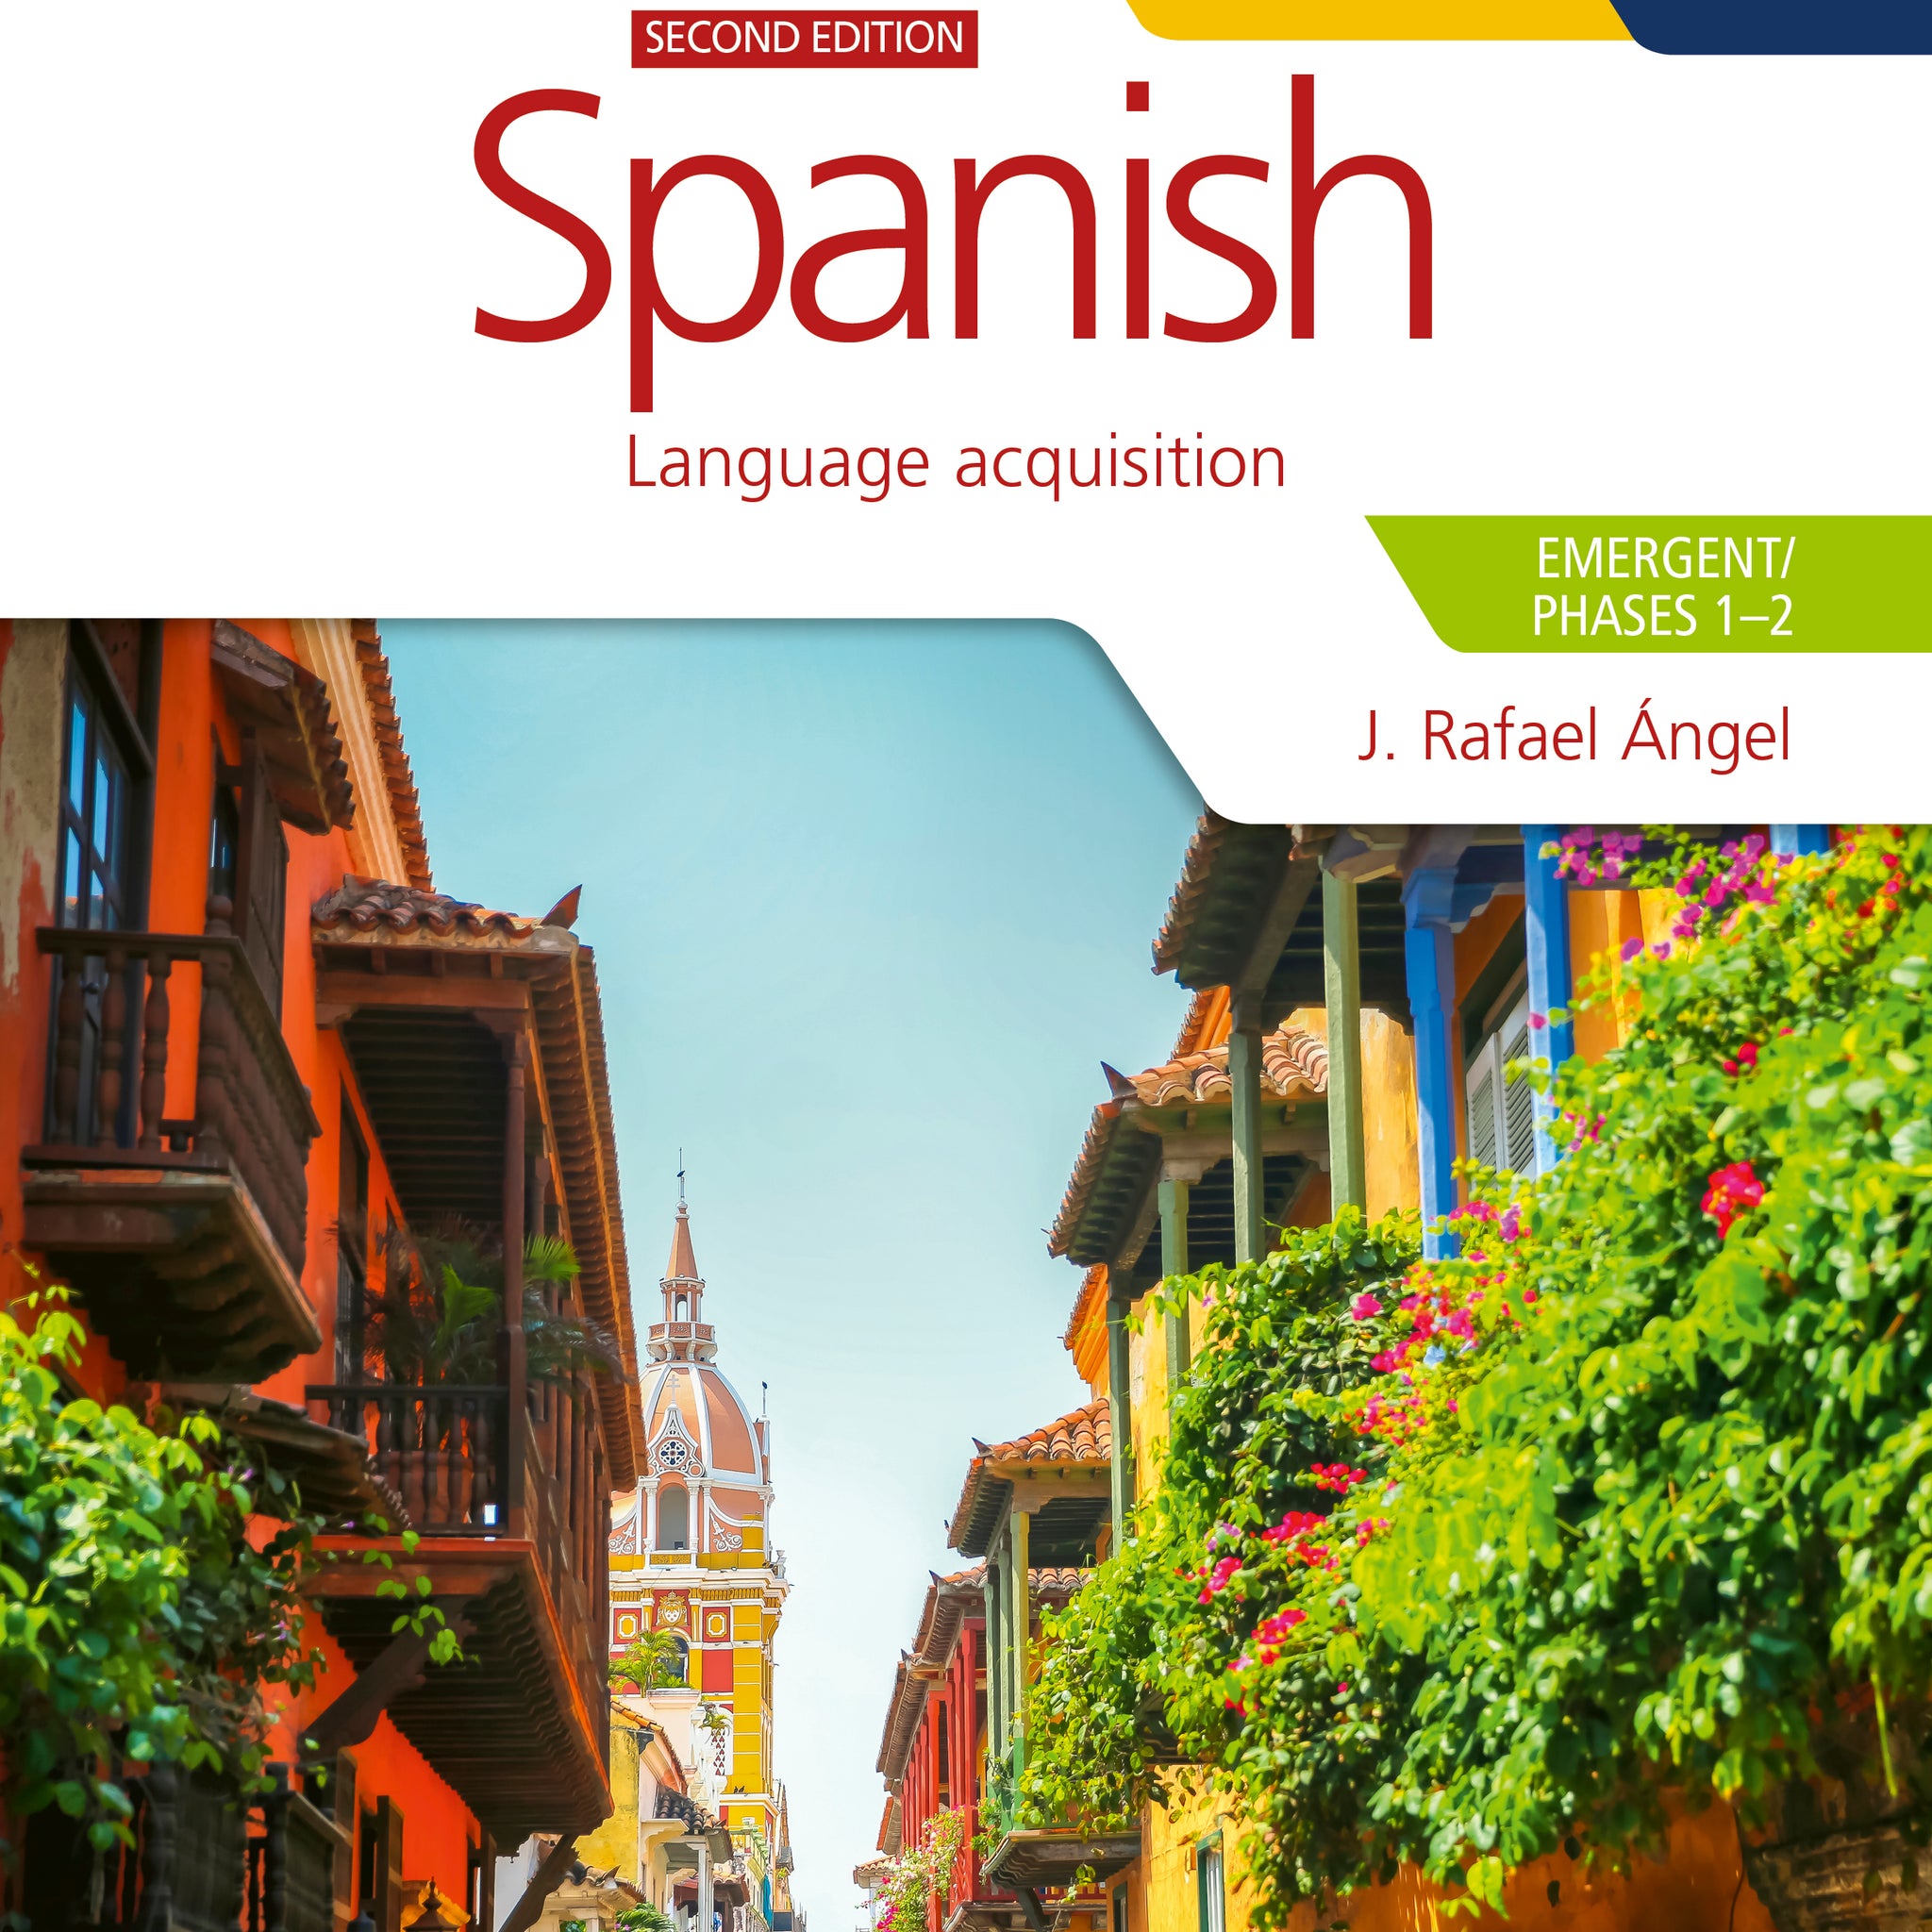 Spanish for the IB MYP 1-3 by Concept (Emergent/Phases 1-2) Second Edition